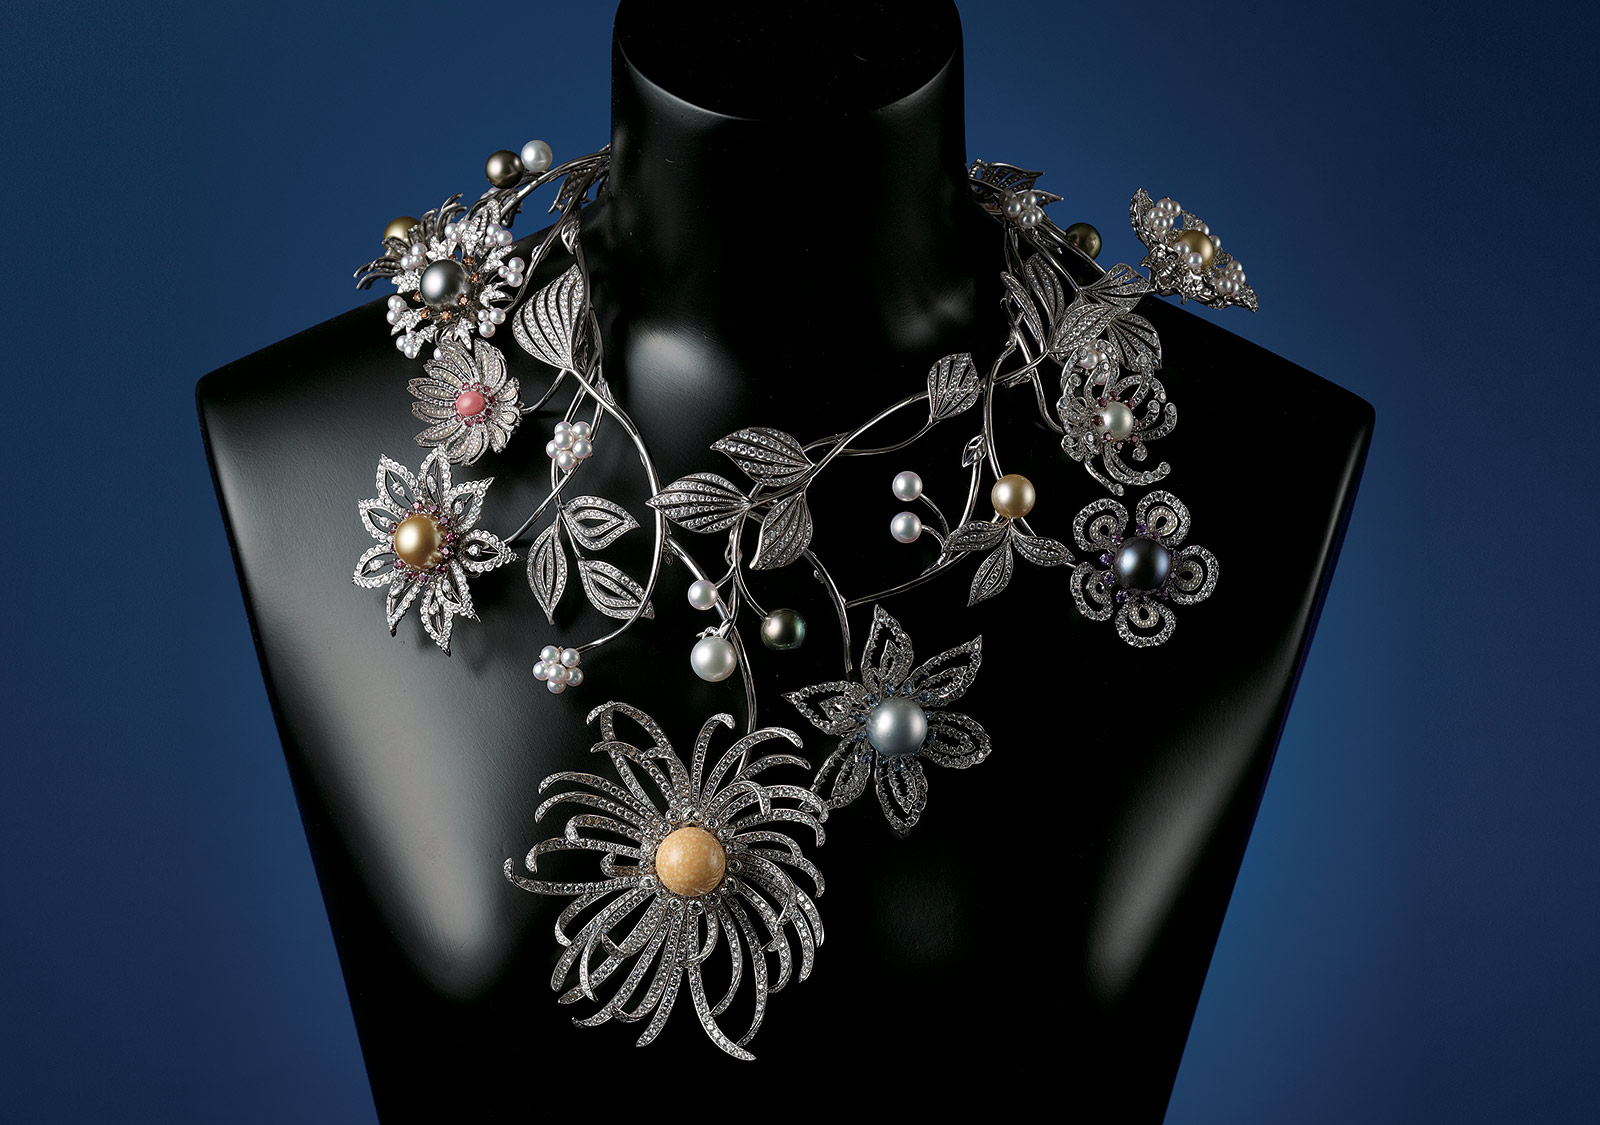 The Mikimoto Dreams & Pearls crown can be worn as an elaborate necklace